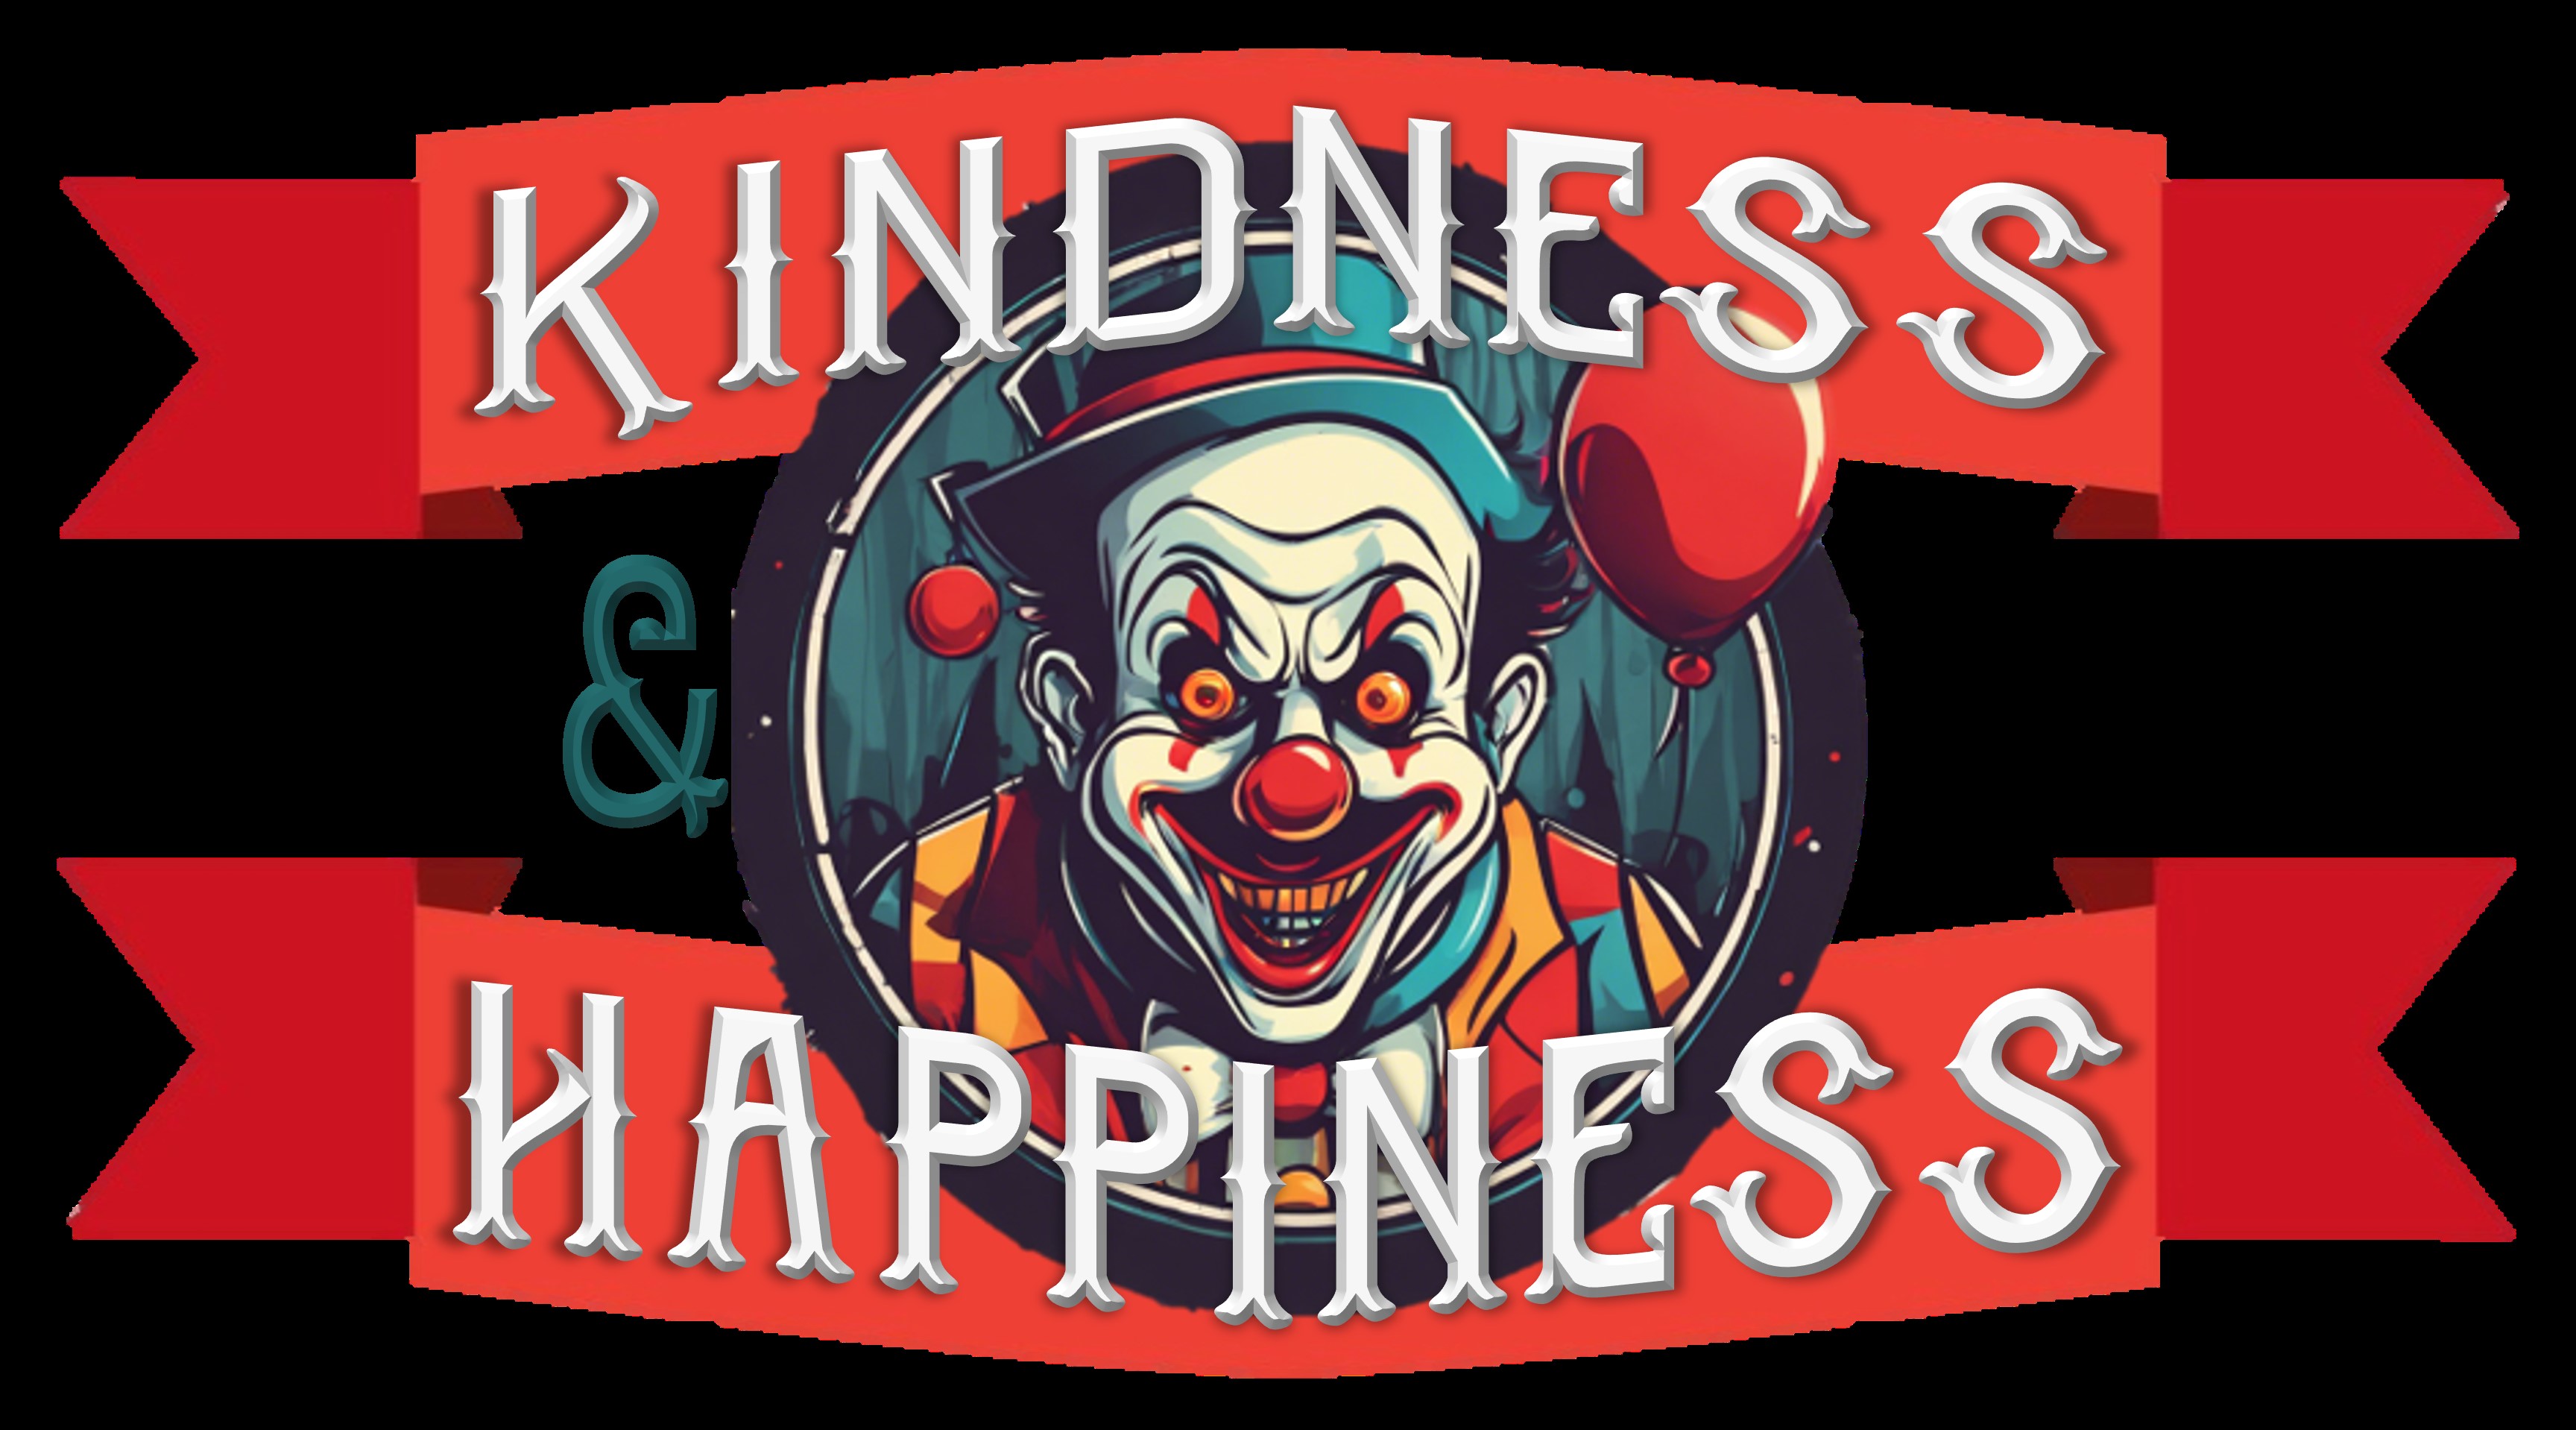 Kindness & Happiness